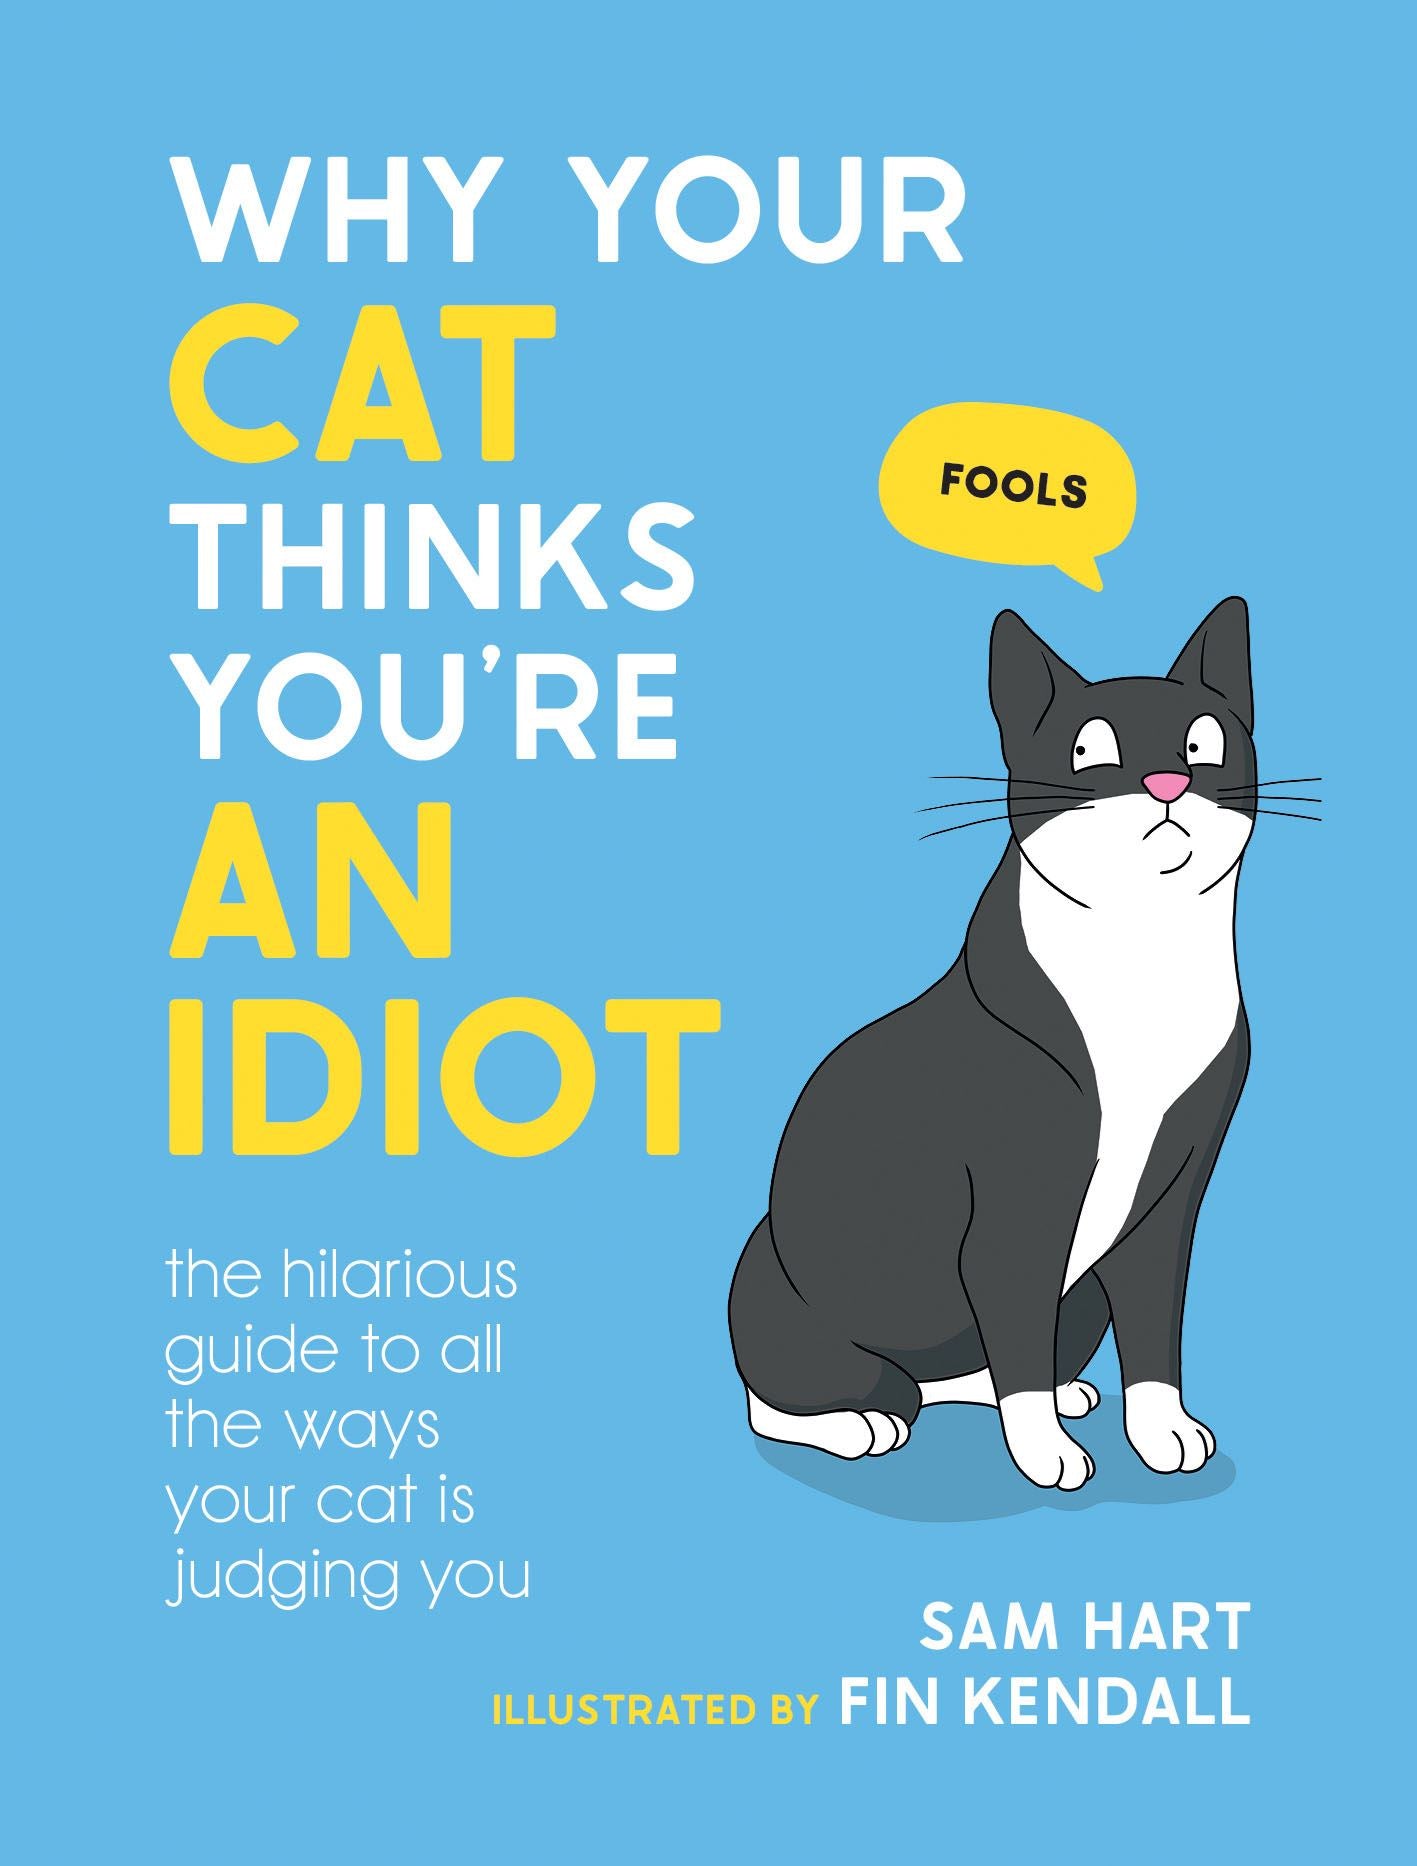 Filled with witty original illustrations, this book offers many reasons why your pampered puss thinks you’re ridiculous and why they’re in charge. From following you into the bathroom to knocking things off shelves, gain insight into the mind of your moggy and allow them to explain why they act the way they do.